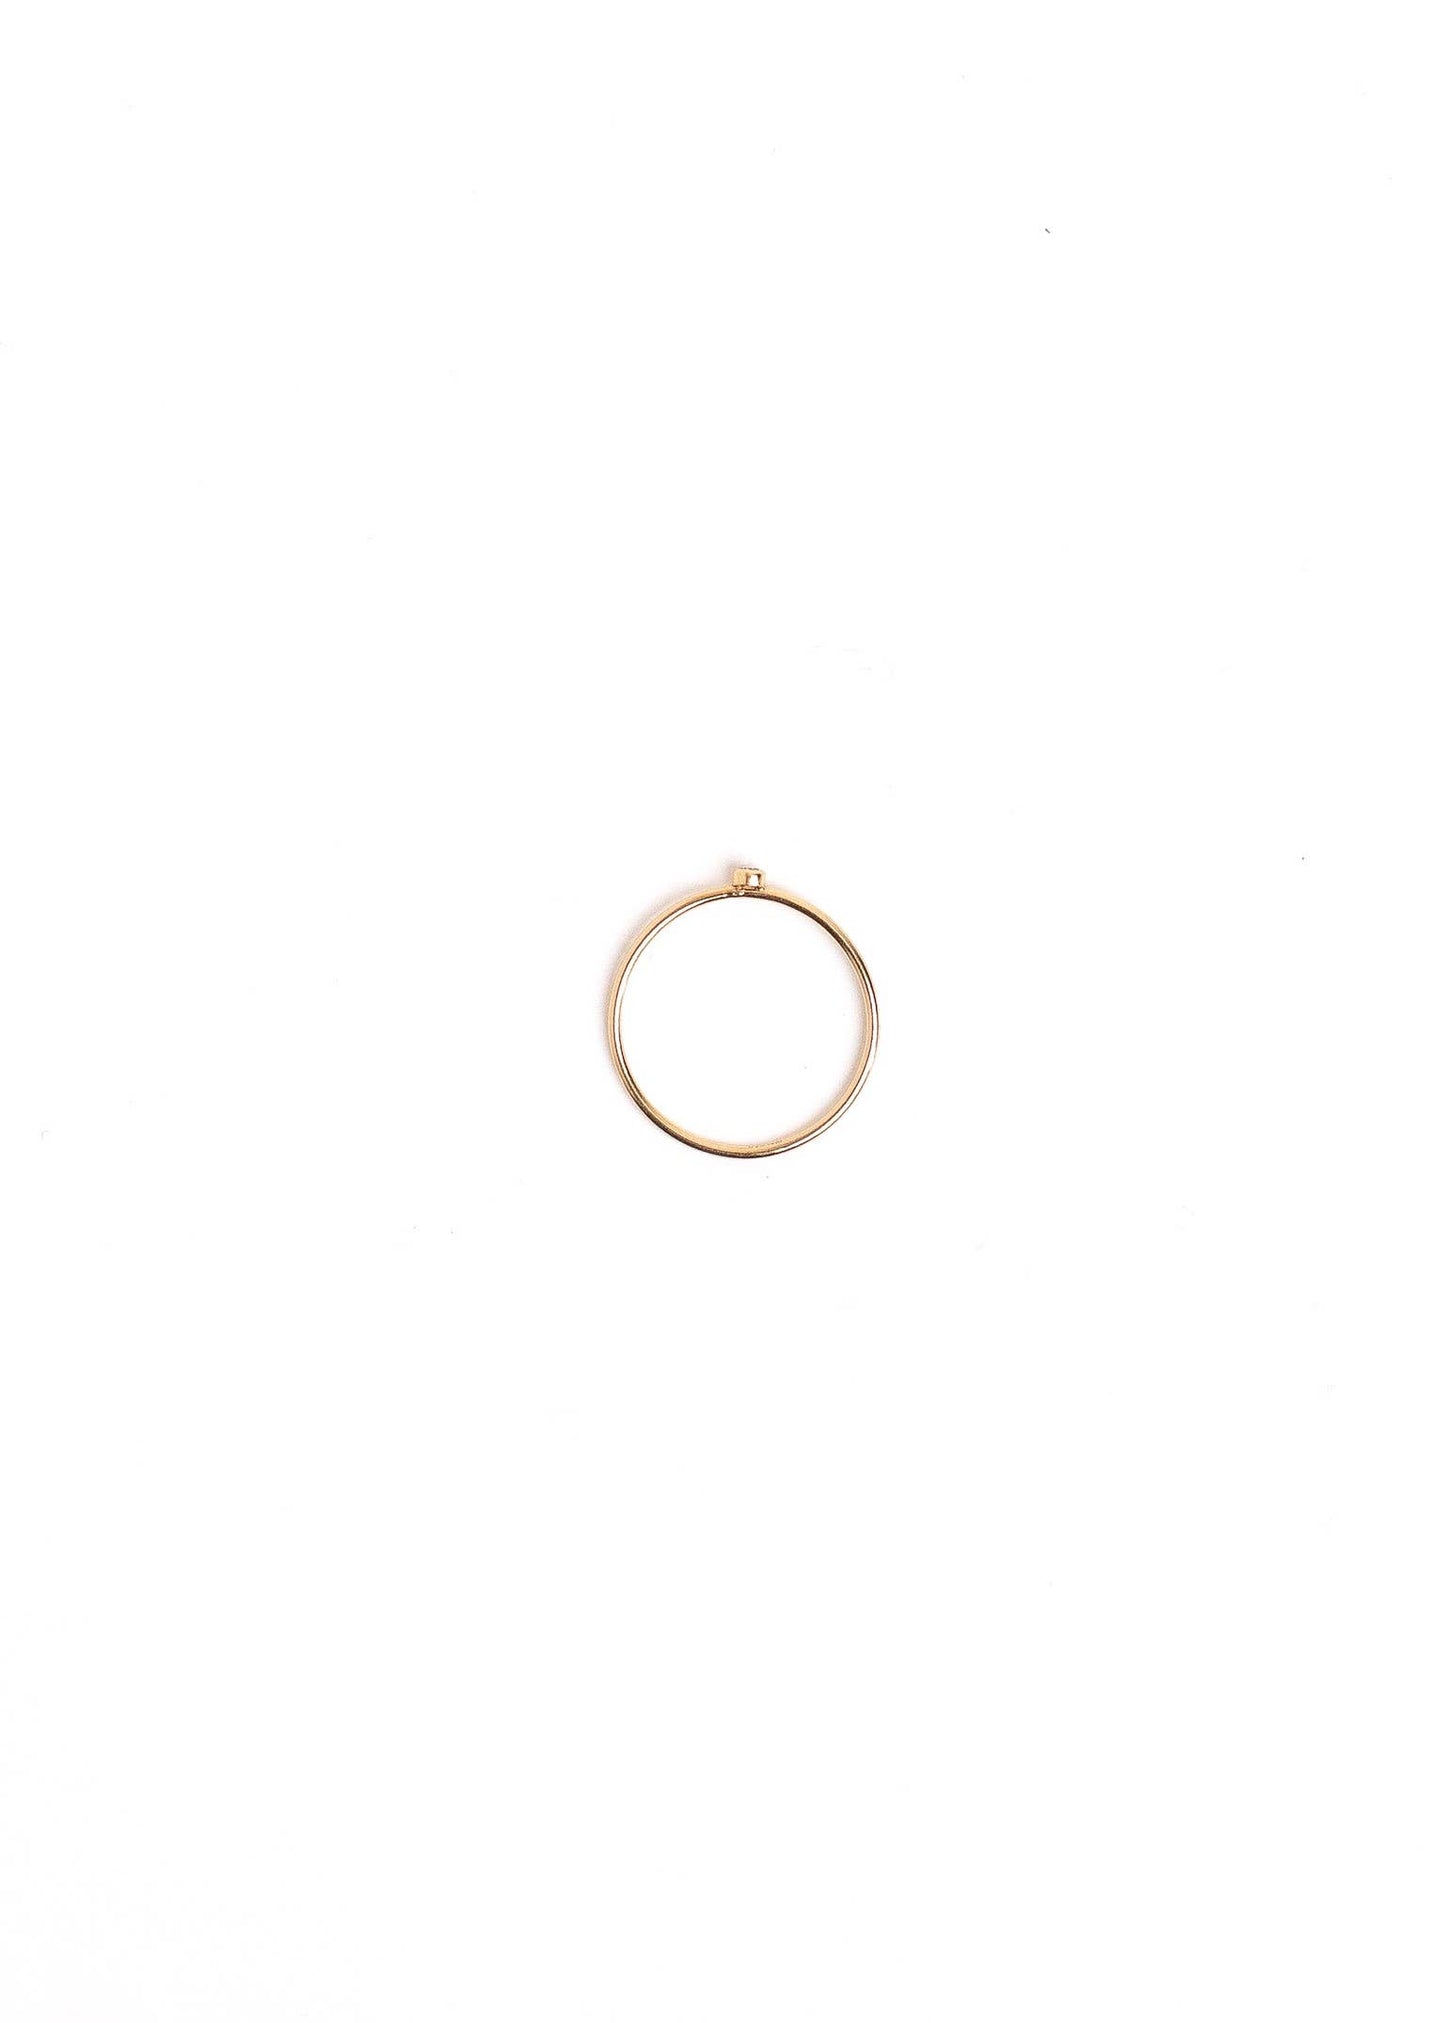 Go Rings - Bezel Stackable Ring - Size 6